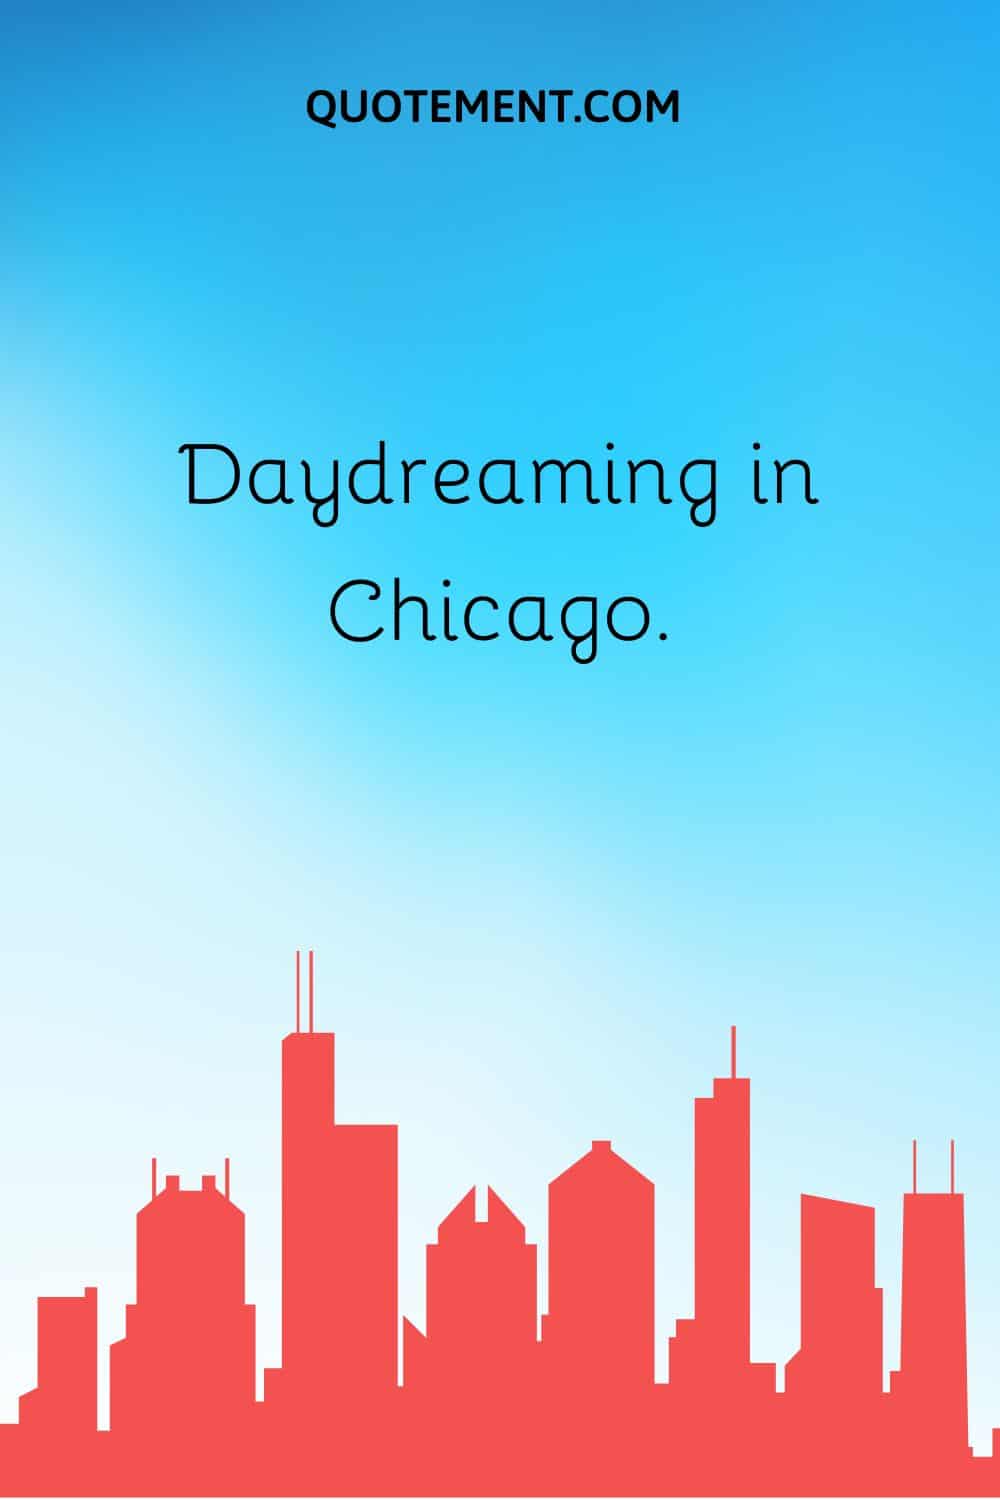 Daydreaming in Chicago.